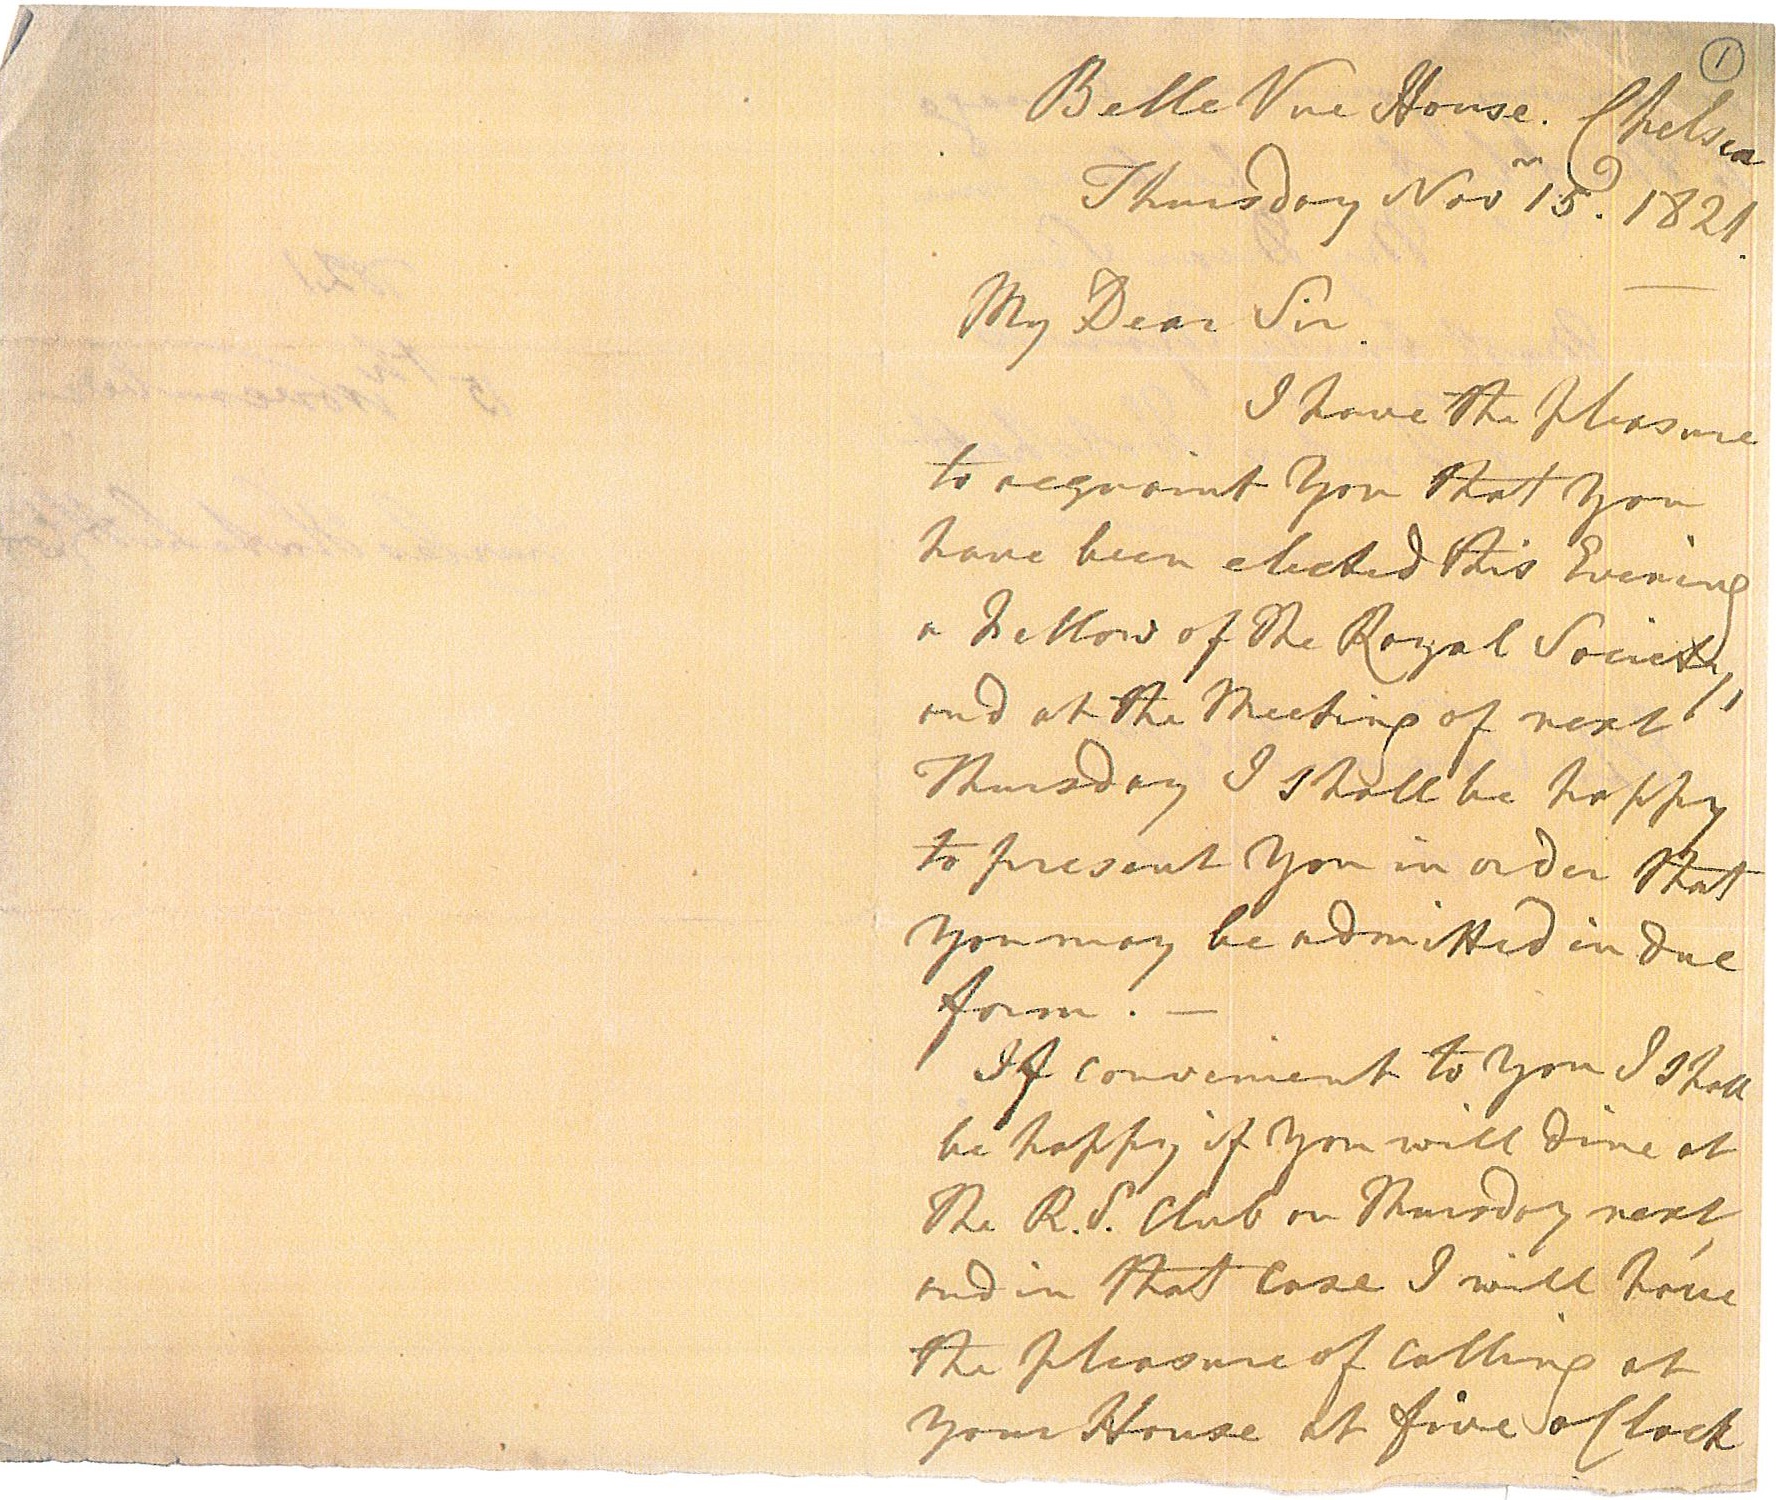 A letter received by John Soane to inform him of his election to the Royal Society.